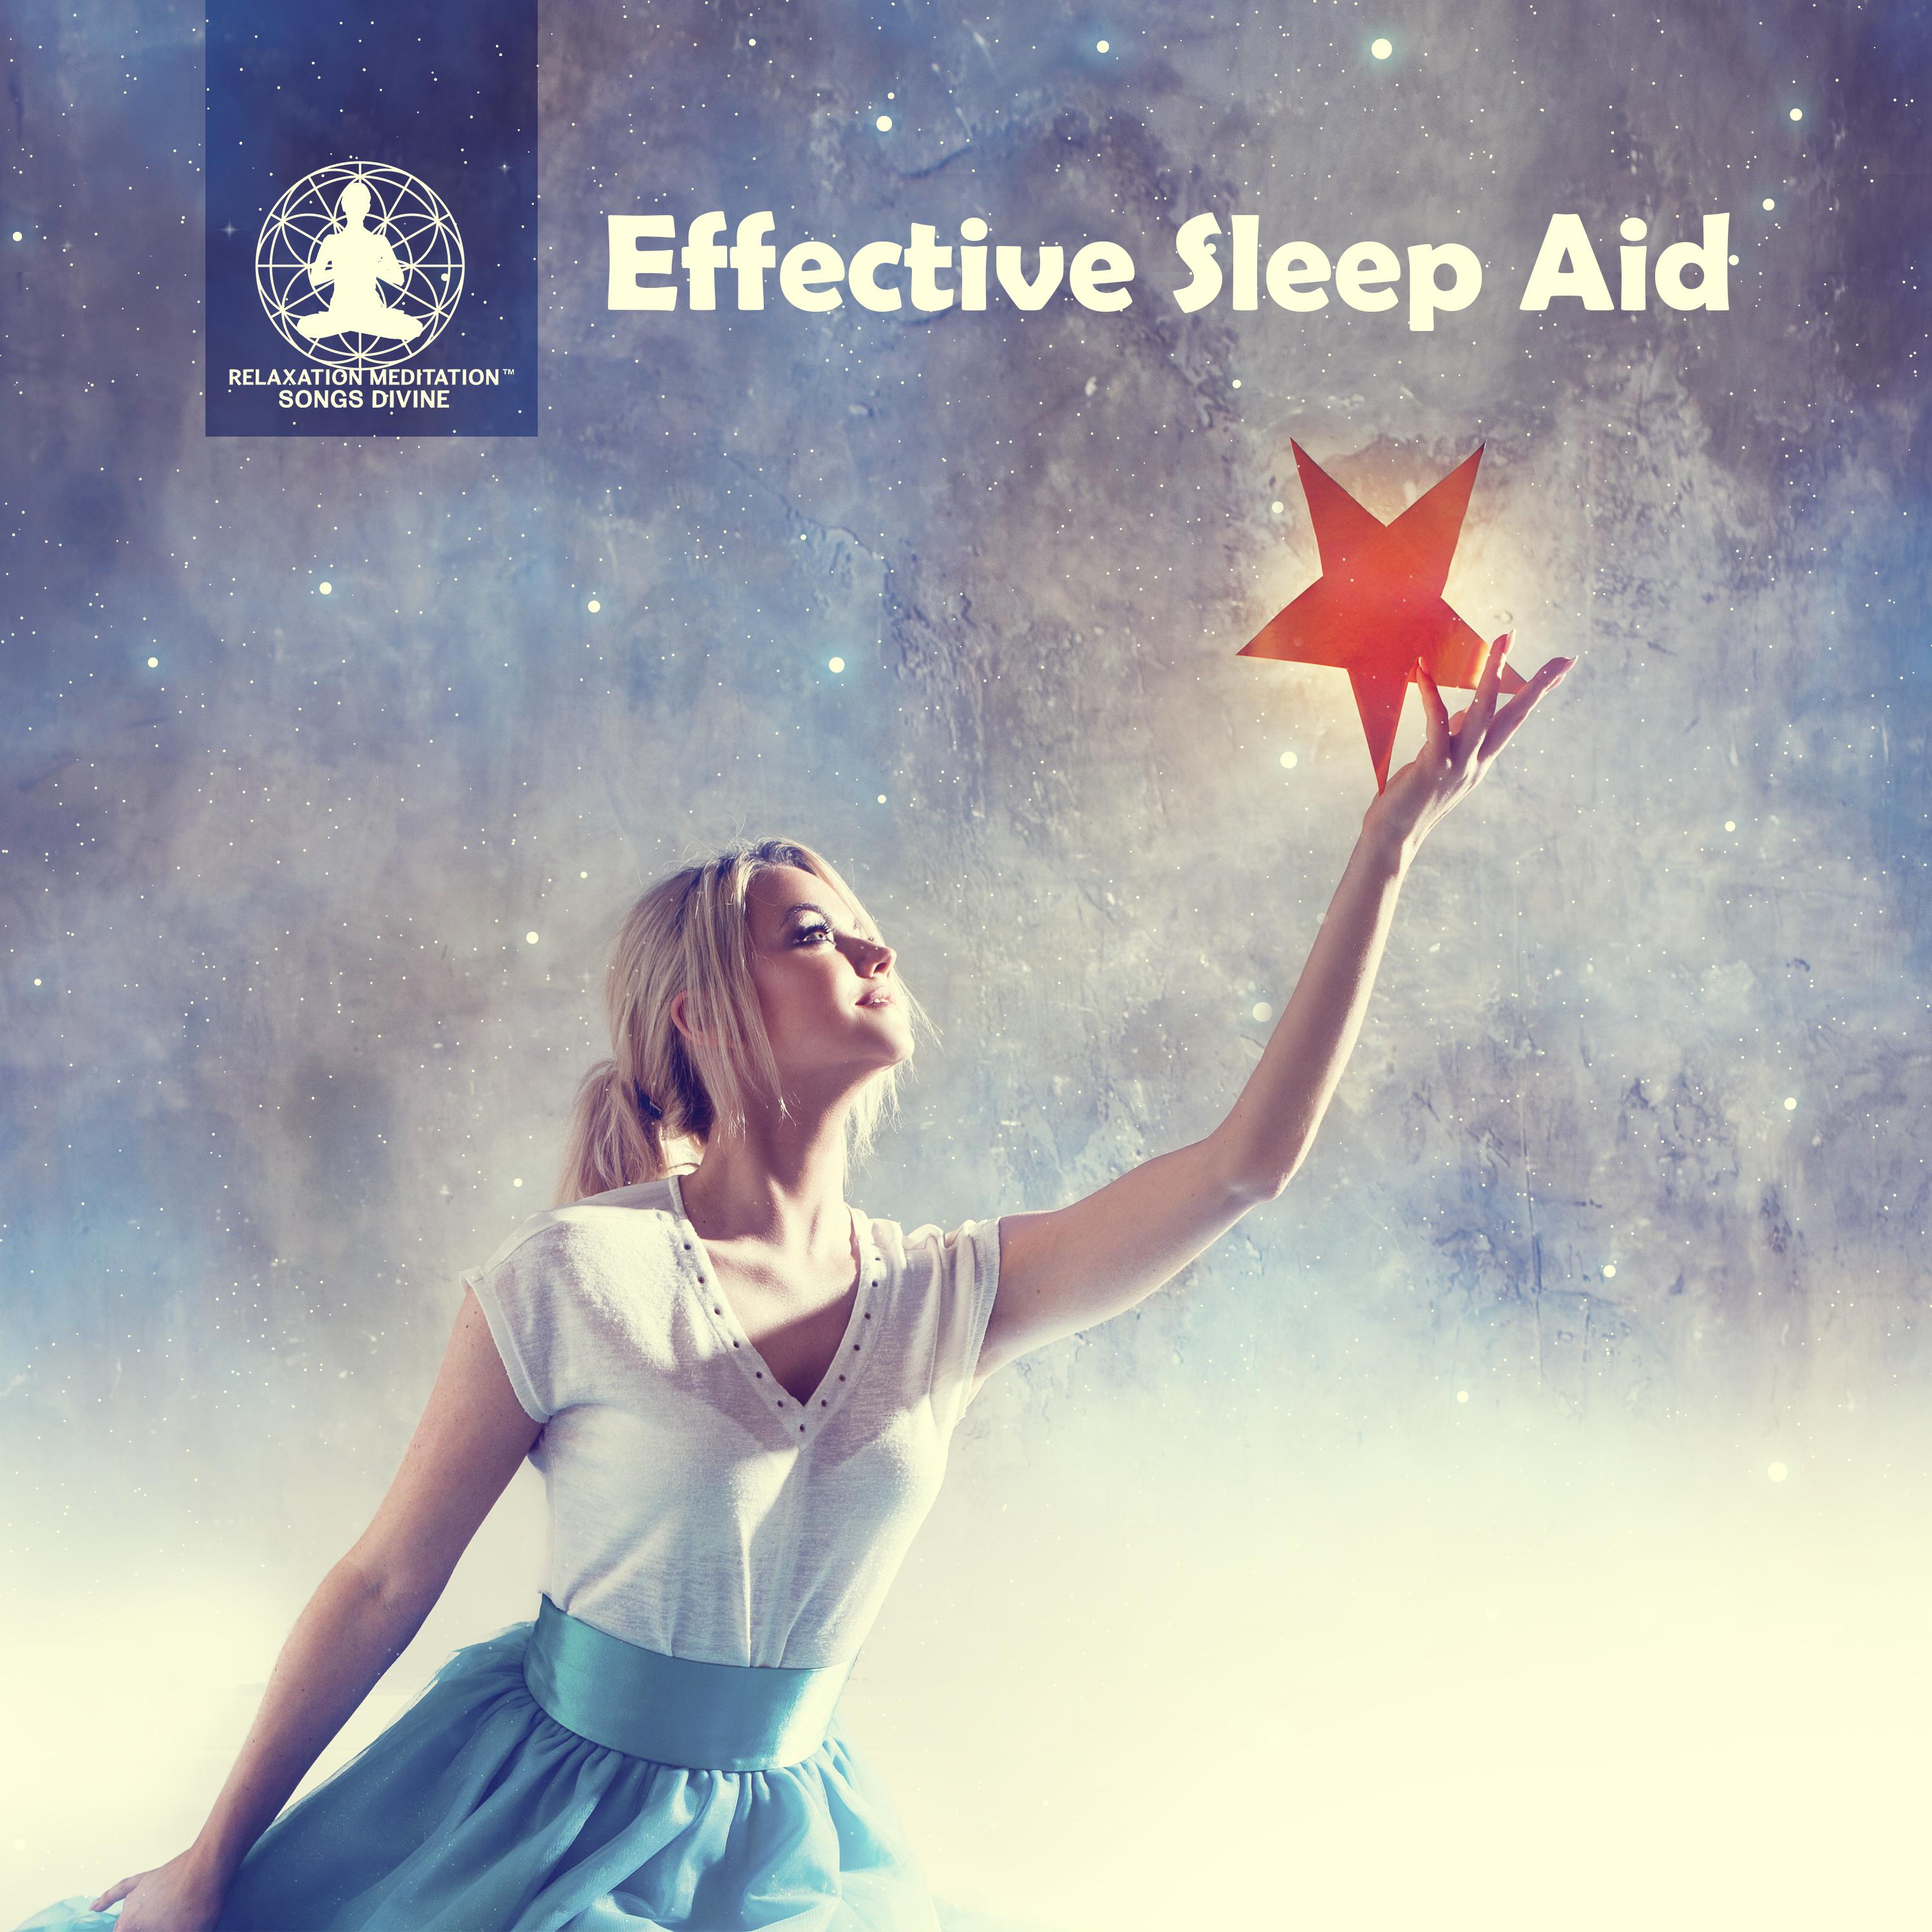 Effective Sleep Aid (Fight Insomnia, Quickly Fall Asleep, Soothing Dream Sounds, Bedtime)